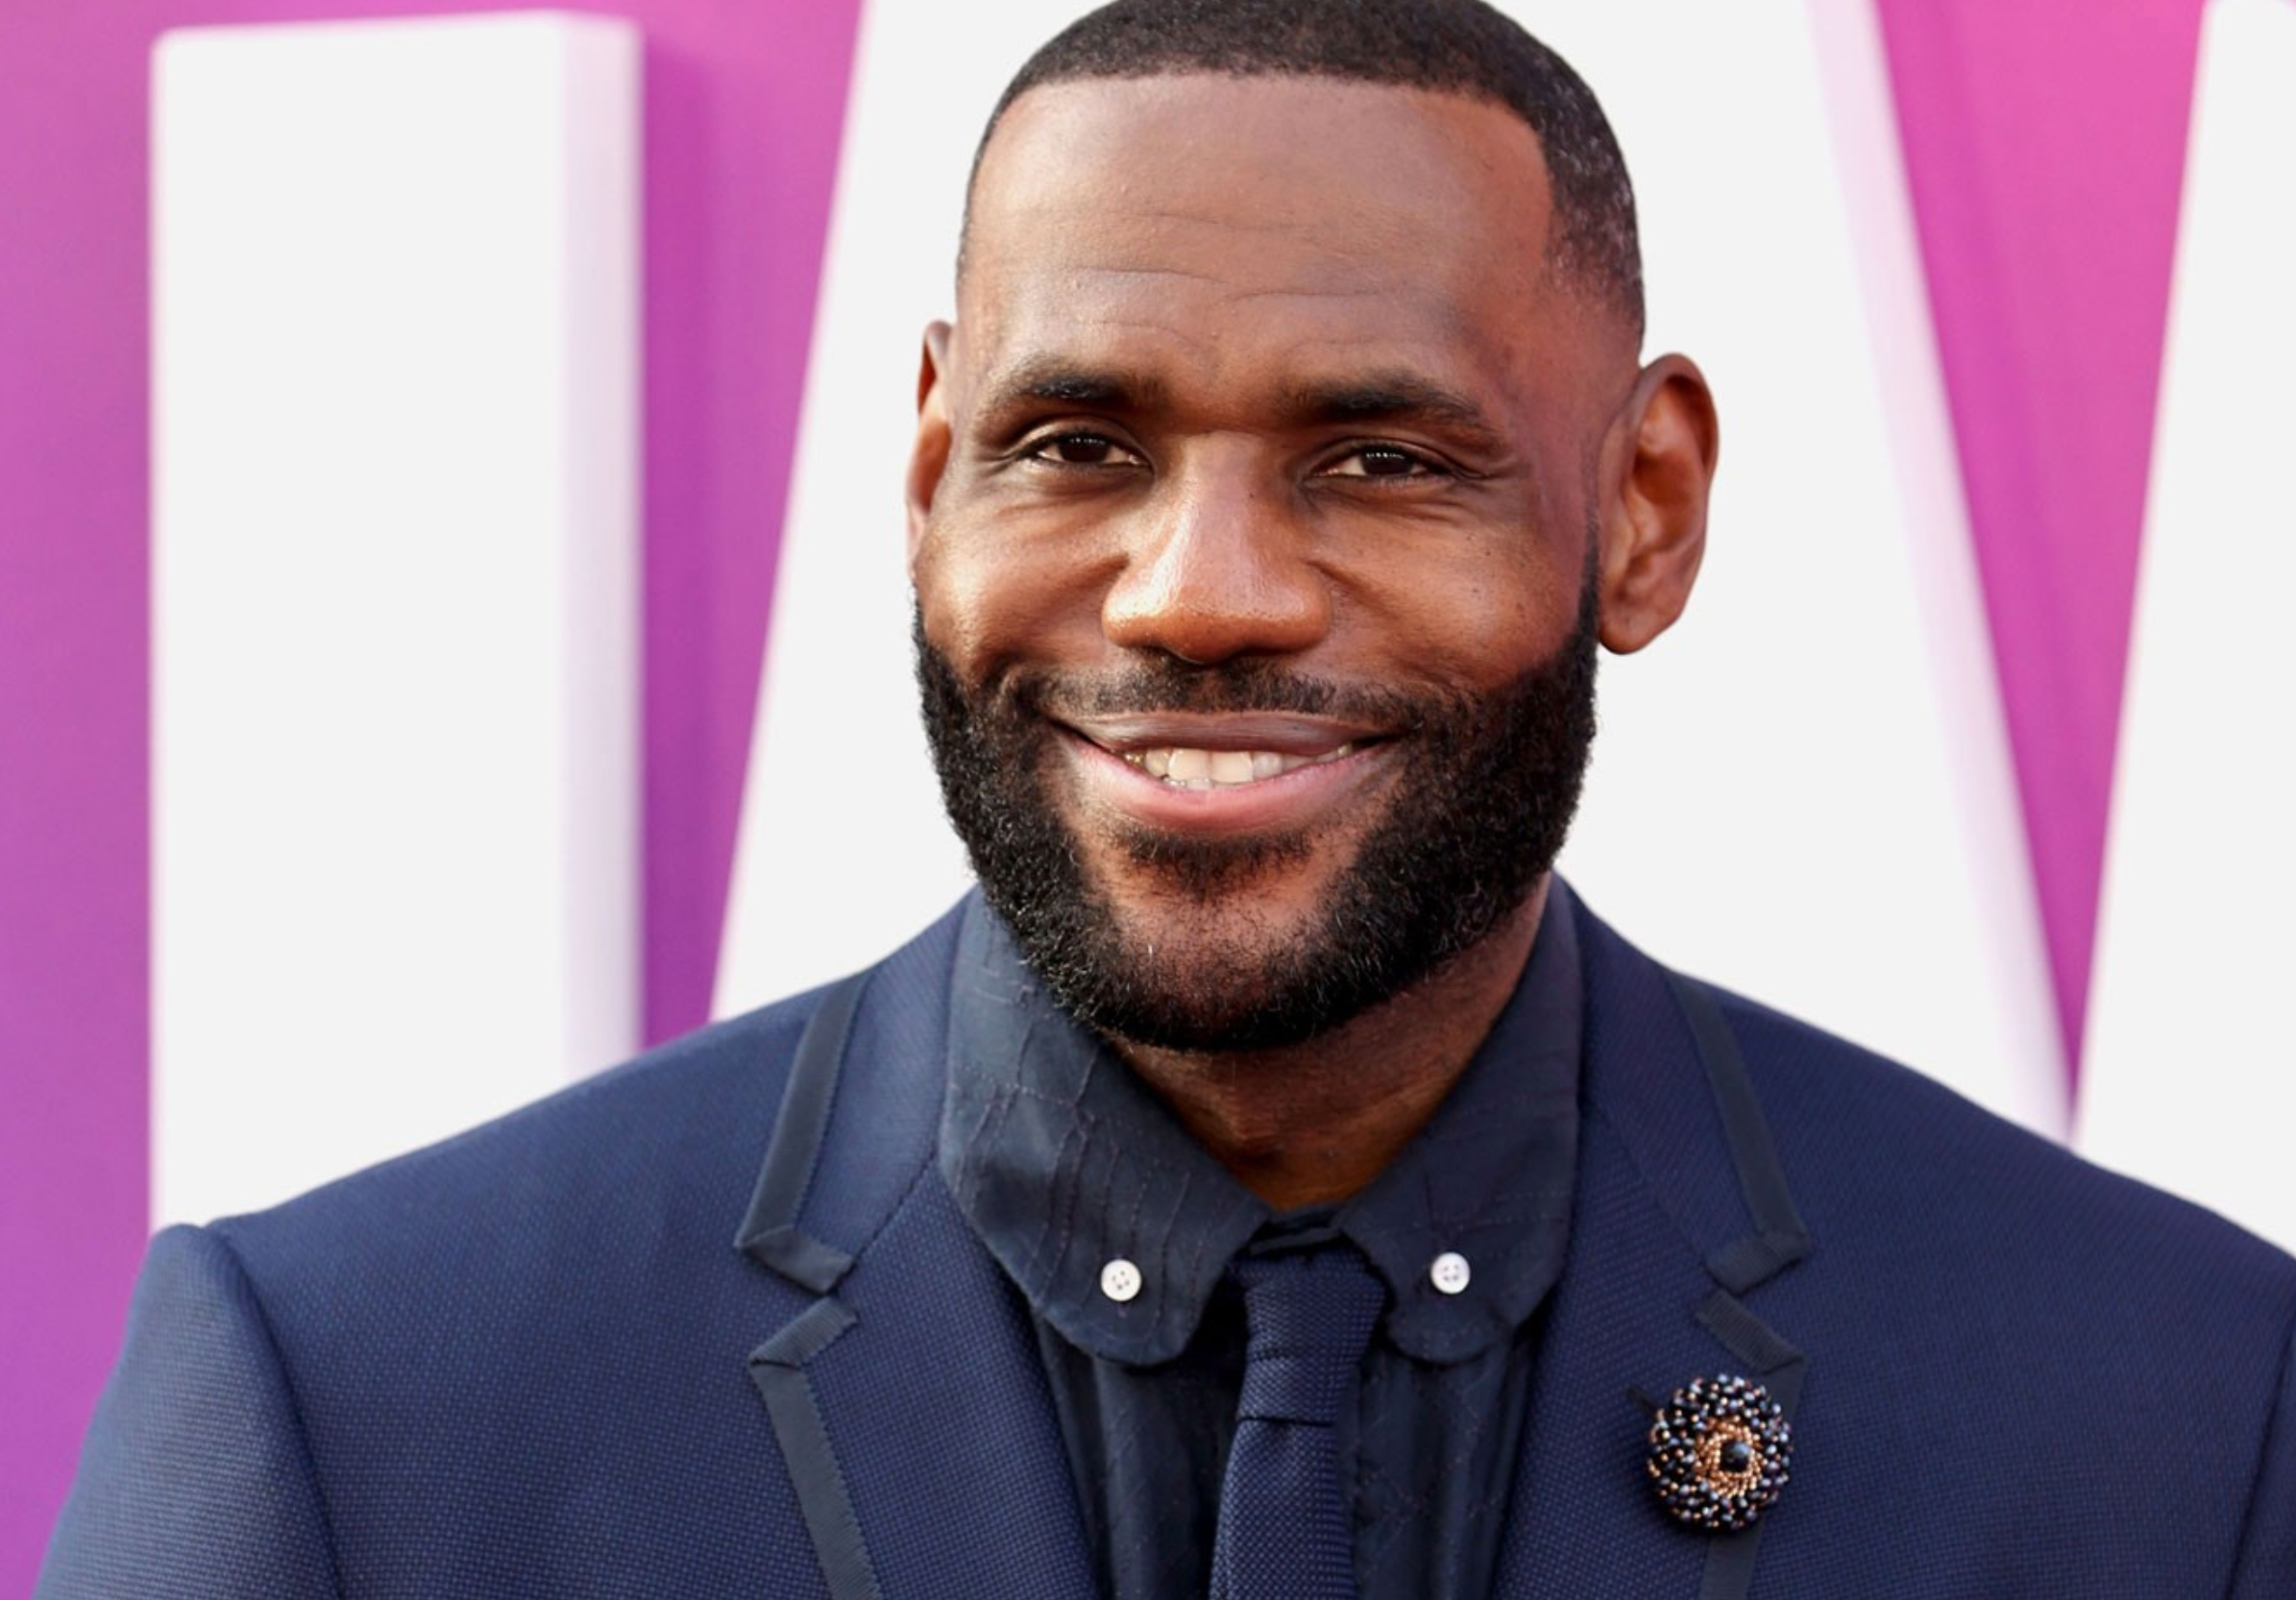 LeBron James To Open Own Museum in Akron in 2023